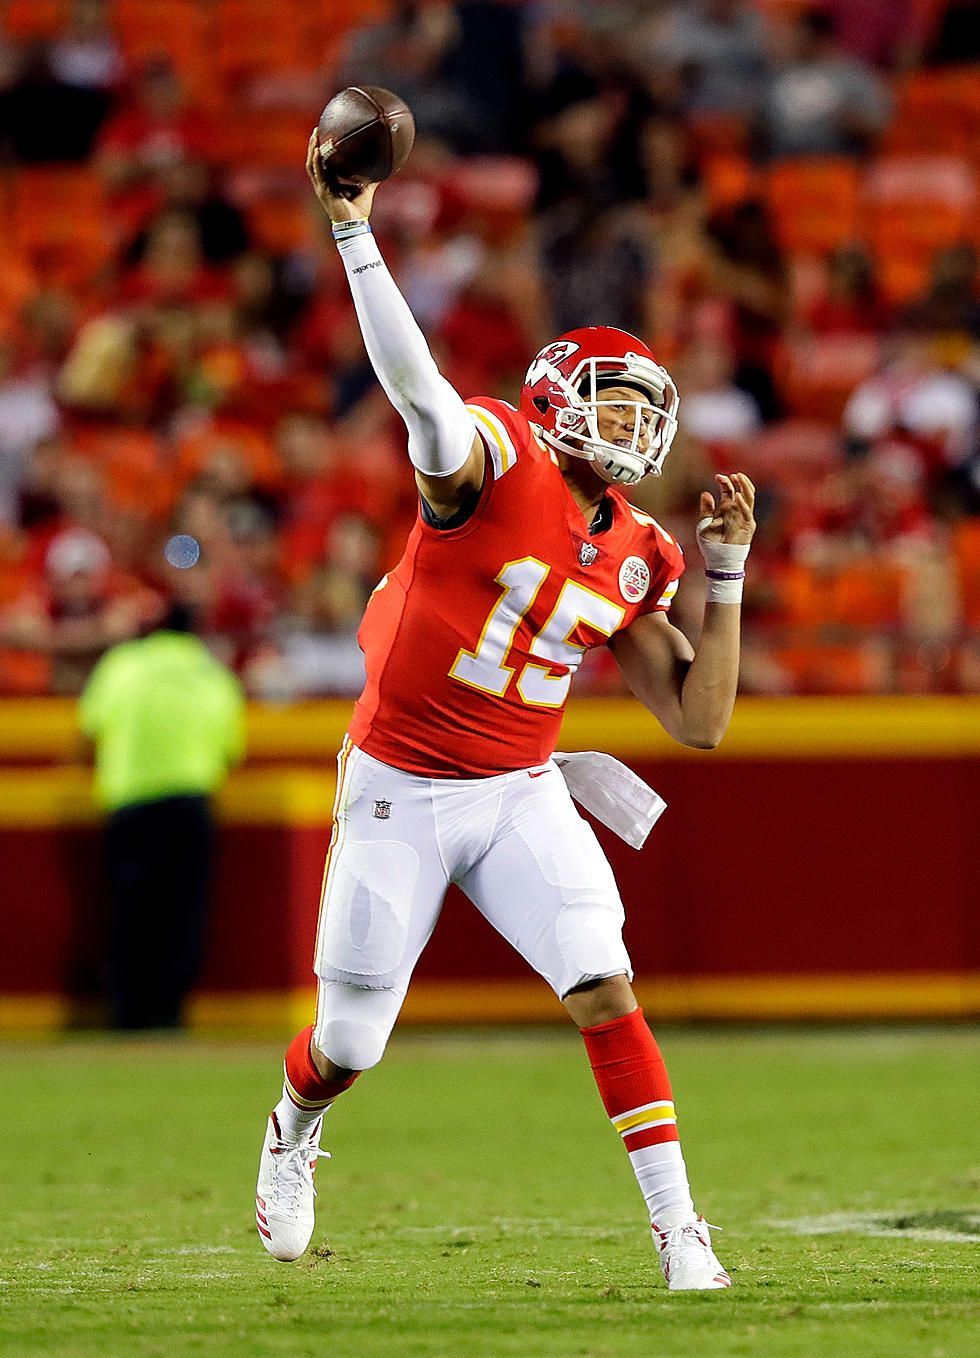 Super Bowl 55 Patrick Mahomes incompletion photos are stunning